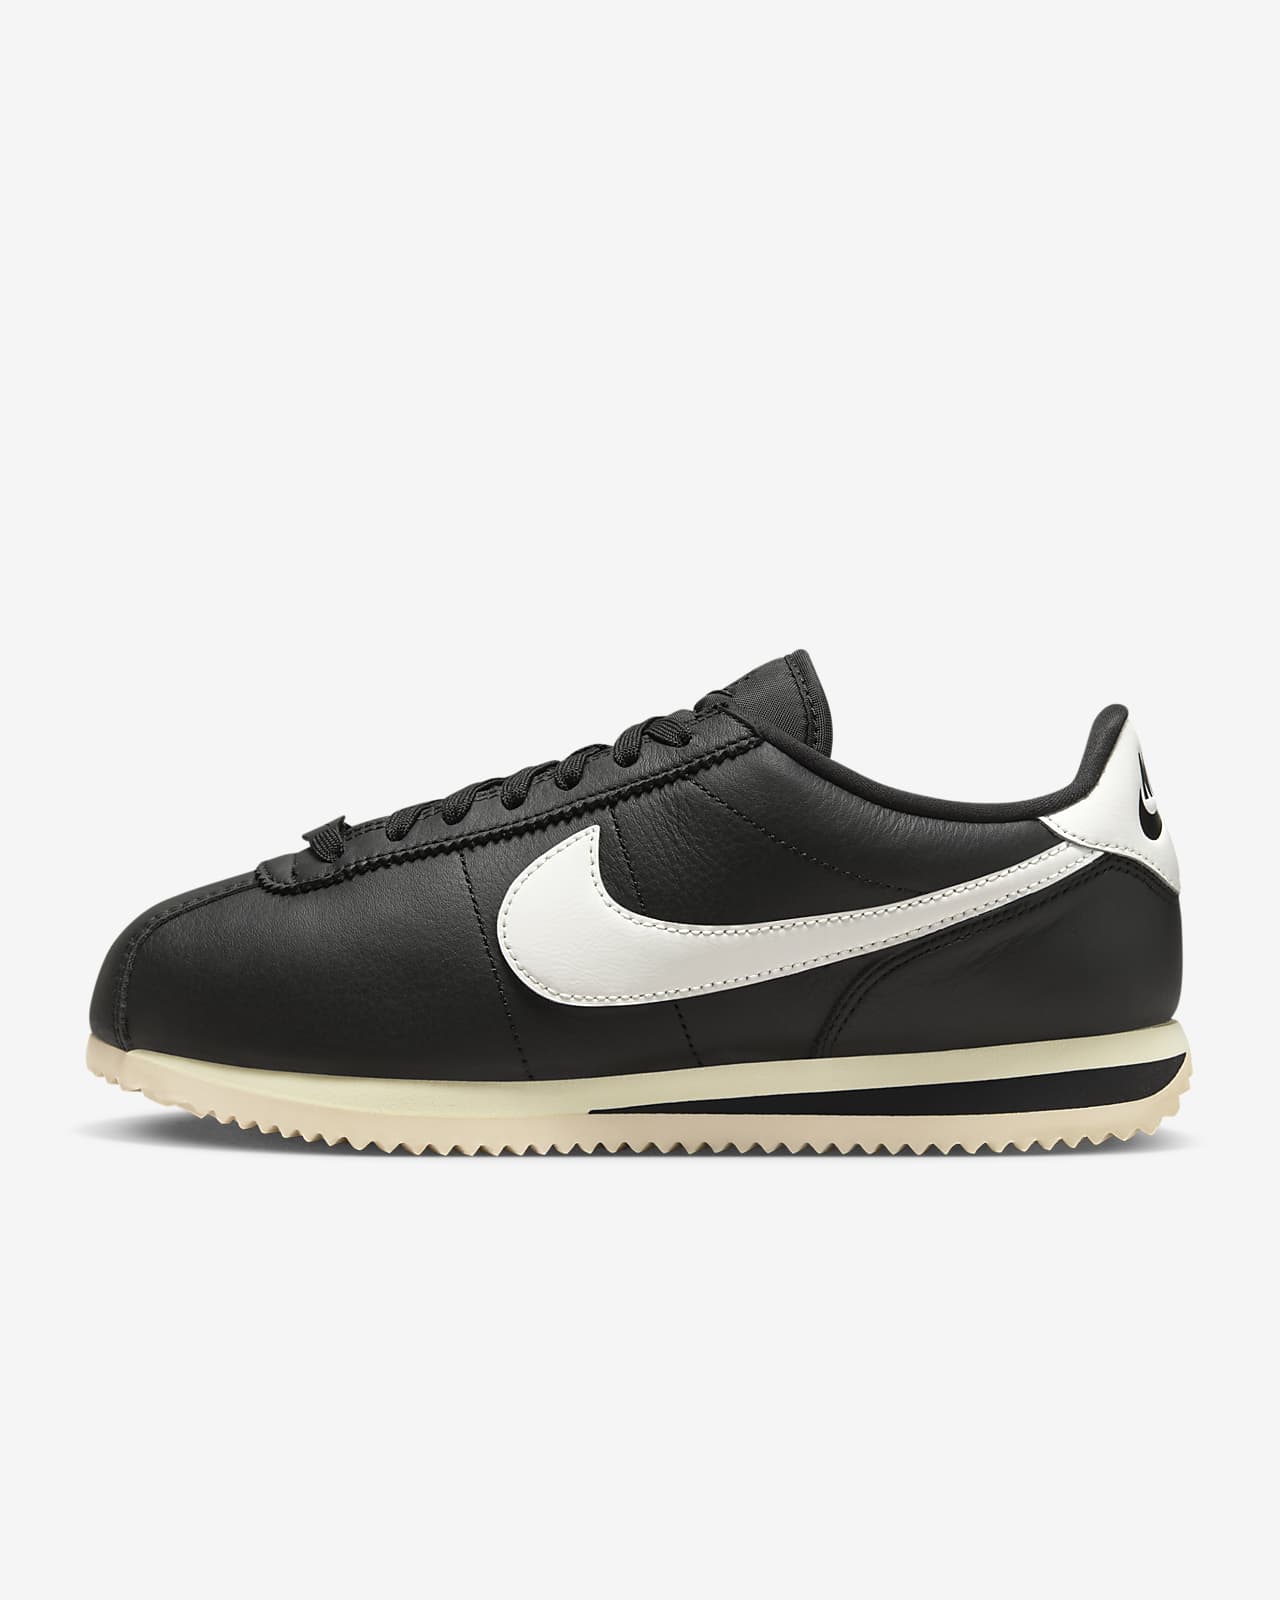 The Nike Cortez sneakers are back on trend, and I'm not mad about it